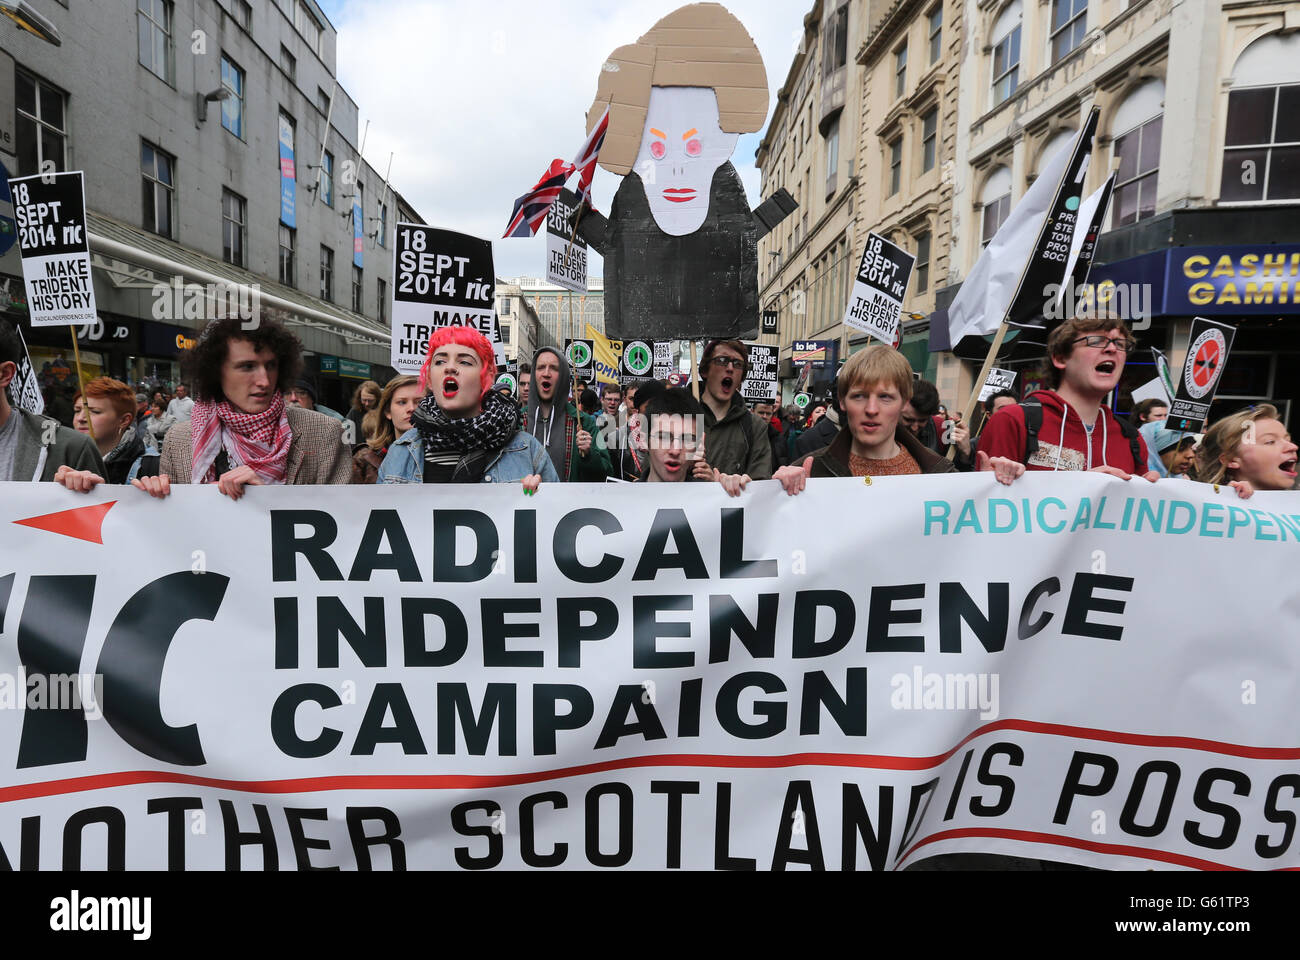 People march through the streets of Glasgow for a Scrap Trident demonstration. MSPs and trade unionists join campaigners to protest against the planned renewal of Trident nuclear weapons. Stock Photo